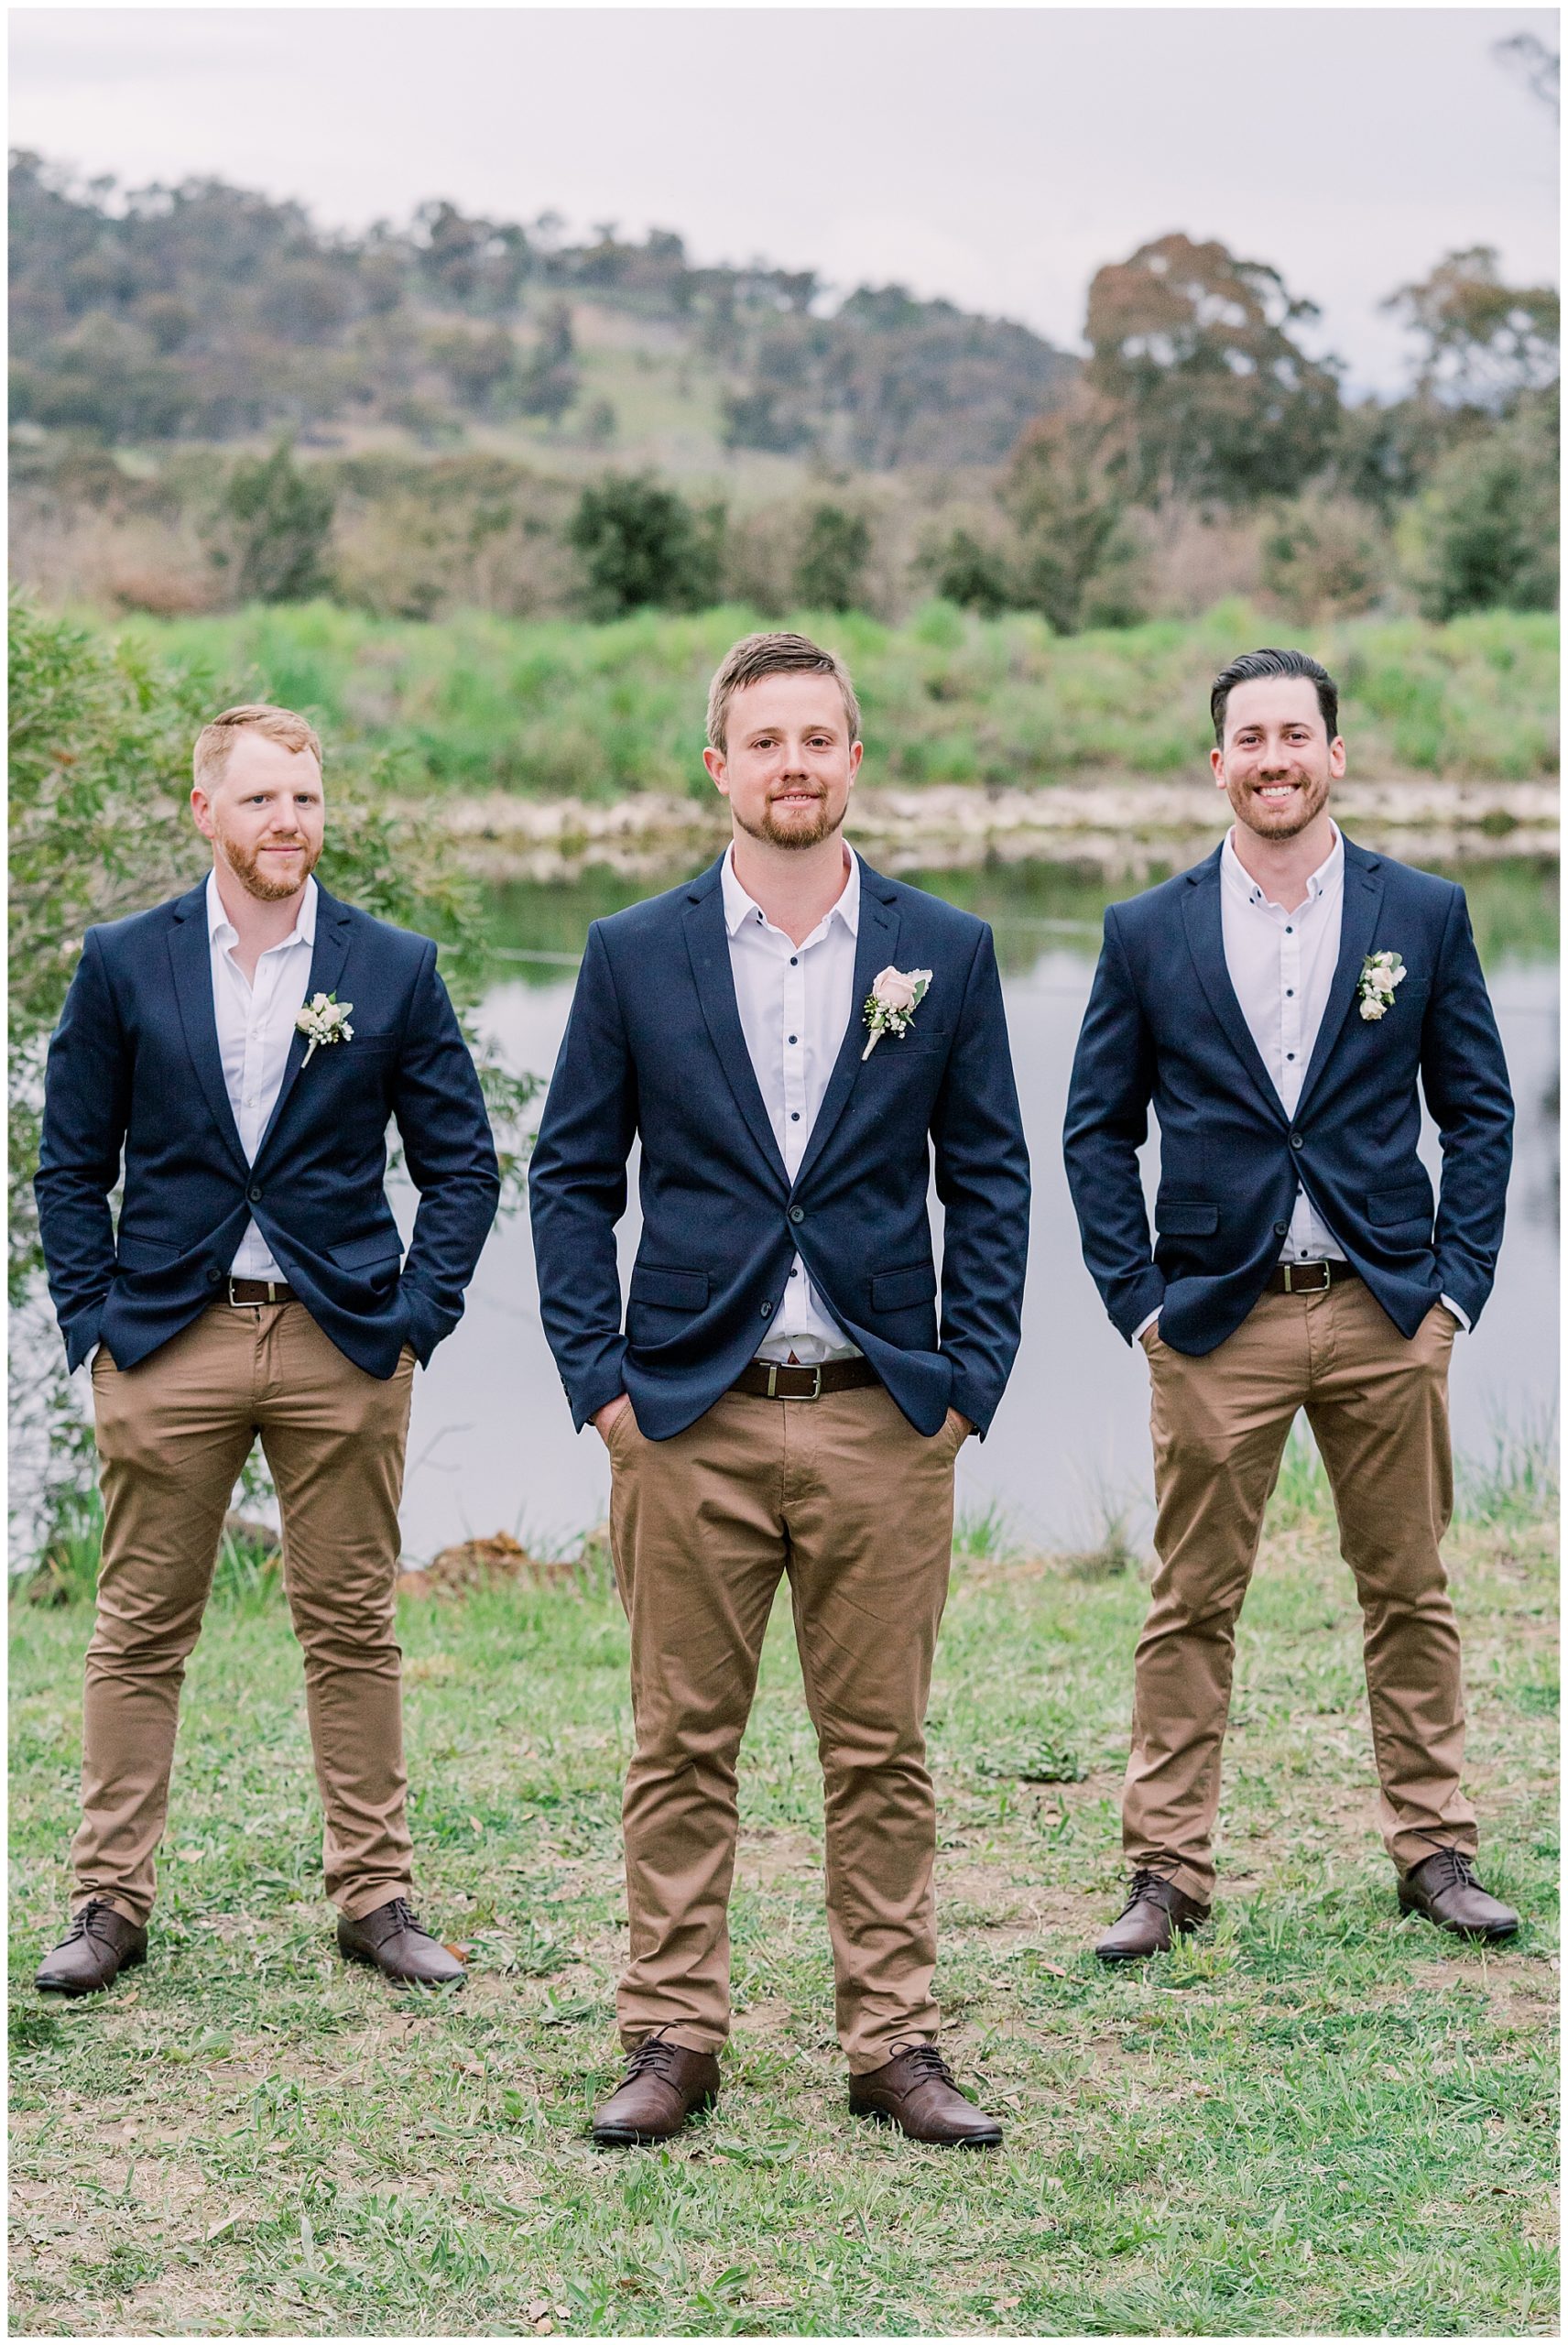 Grooms at a wedding in the Southern  Highlands